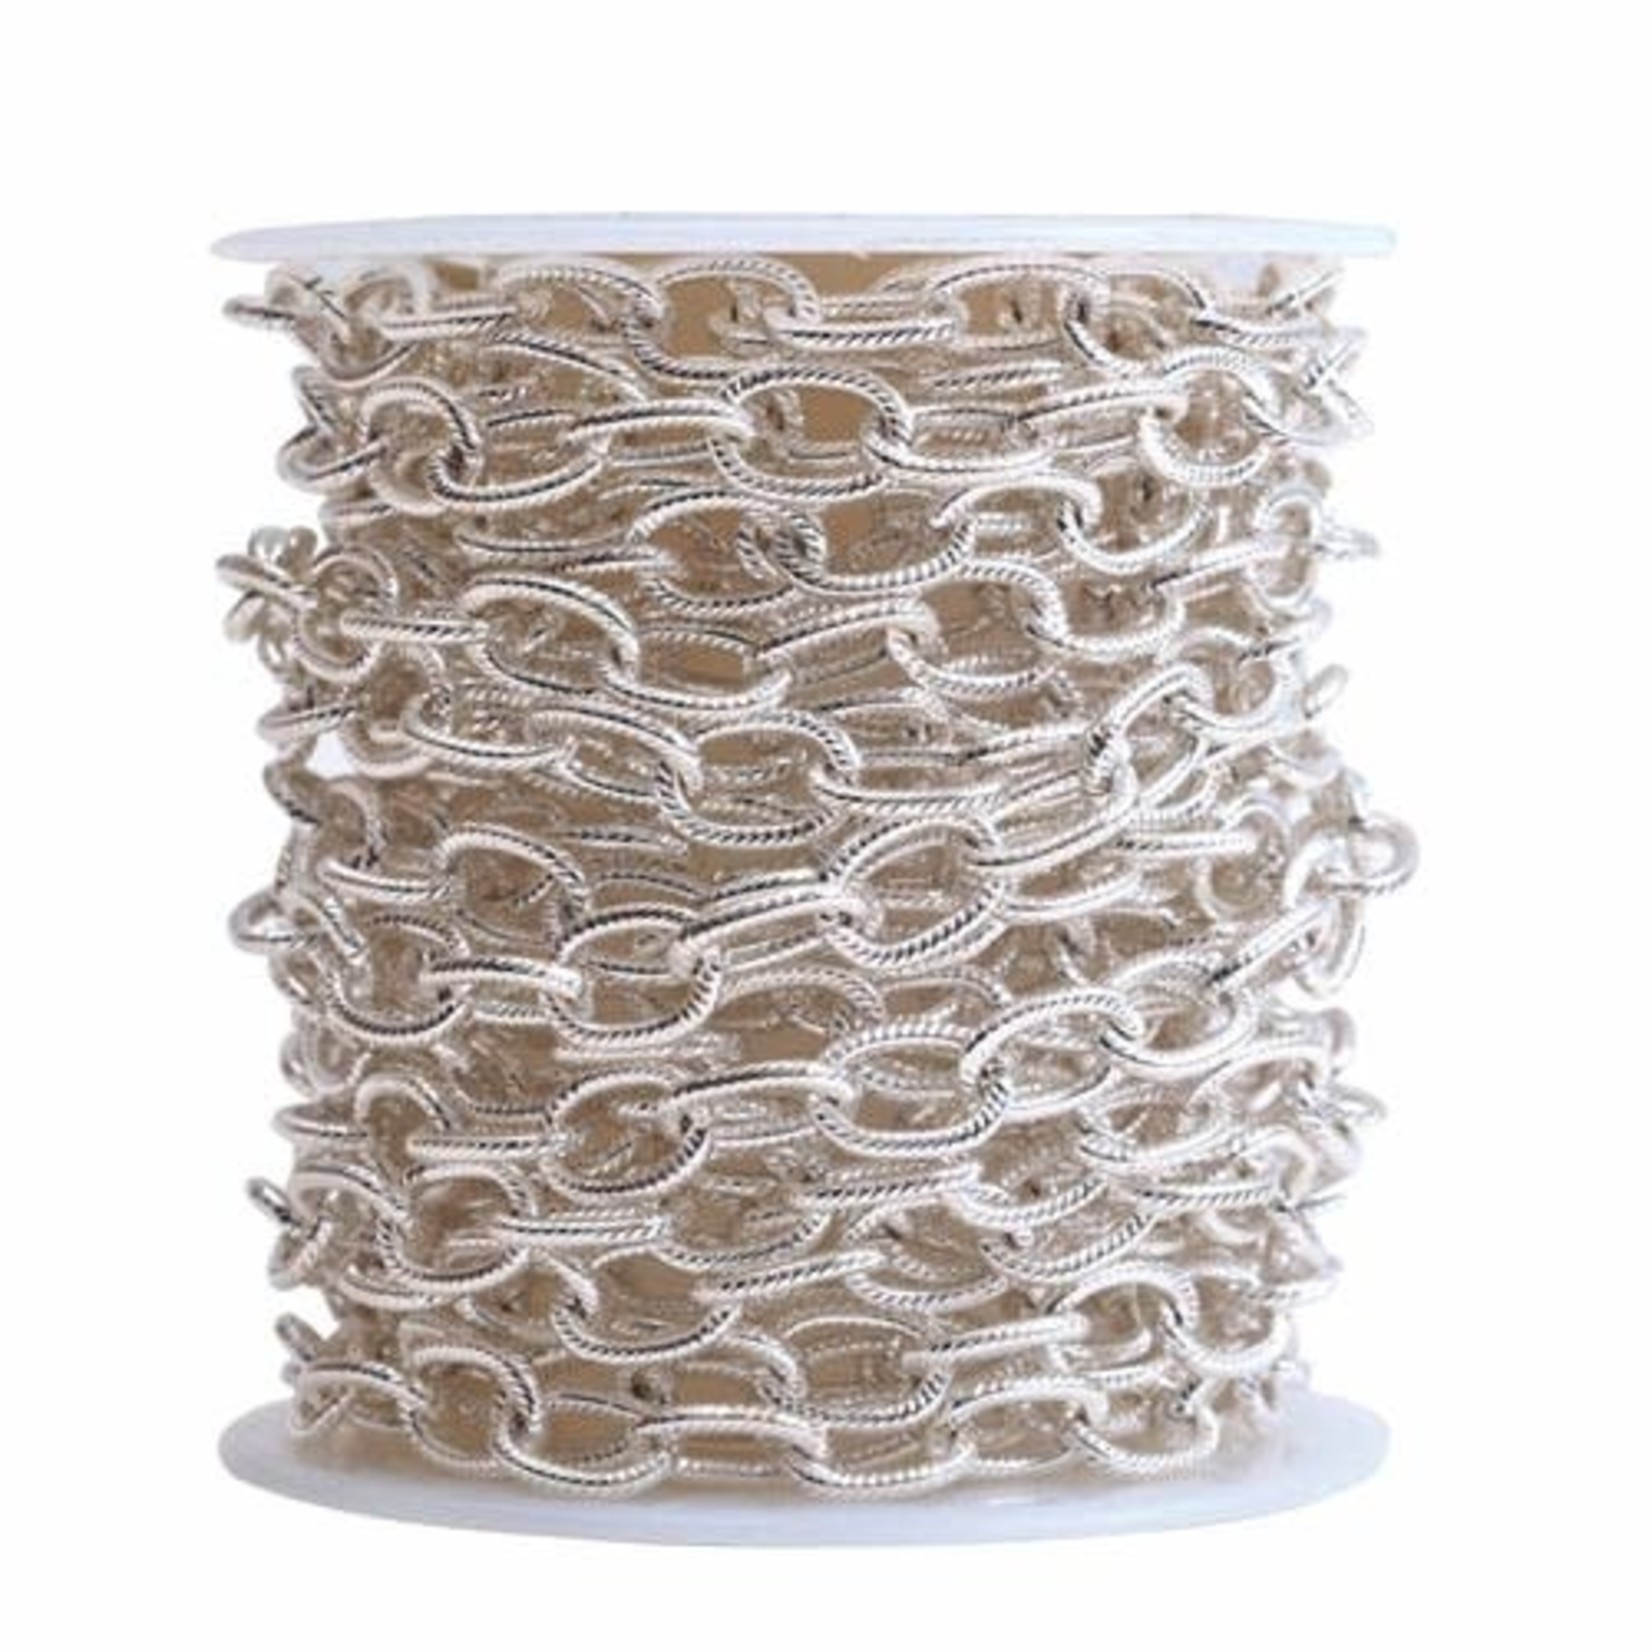 Nunn Design Silver Plated Large Textured Cable Chain